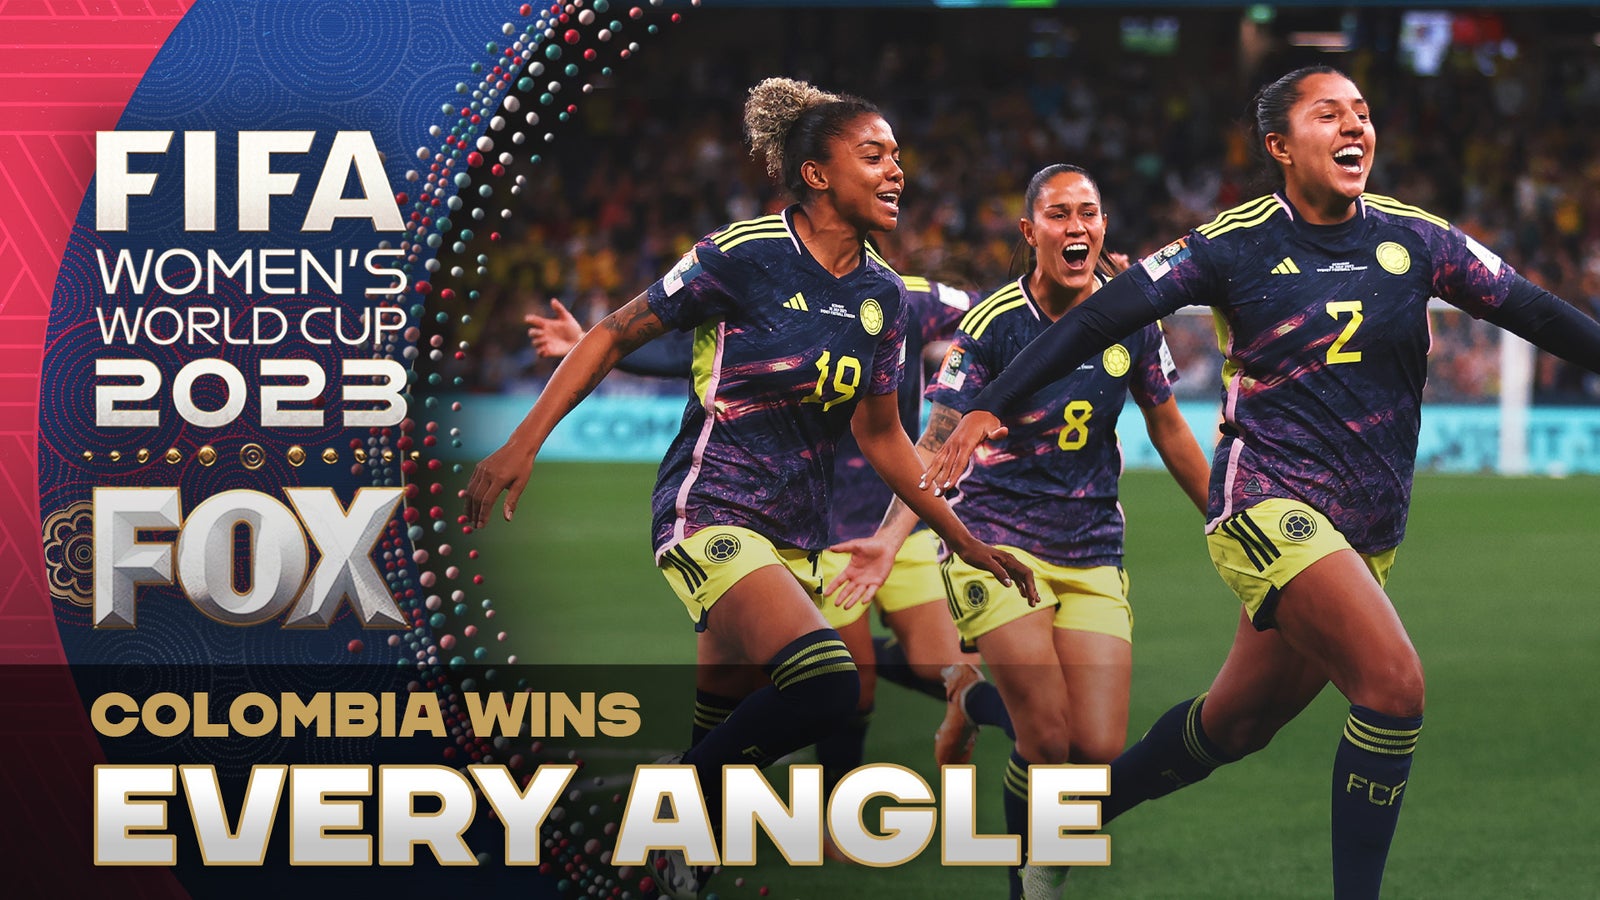 Linda Caicedo and Manuela Vanegas' goals lead Colombia to an EPIC upset vs. Germany | Every Angle